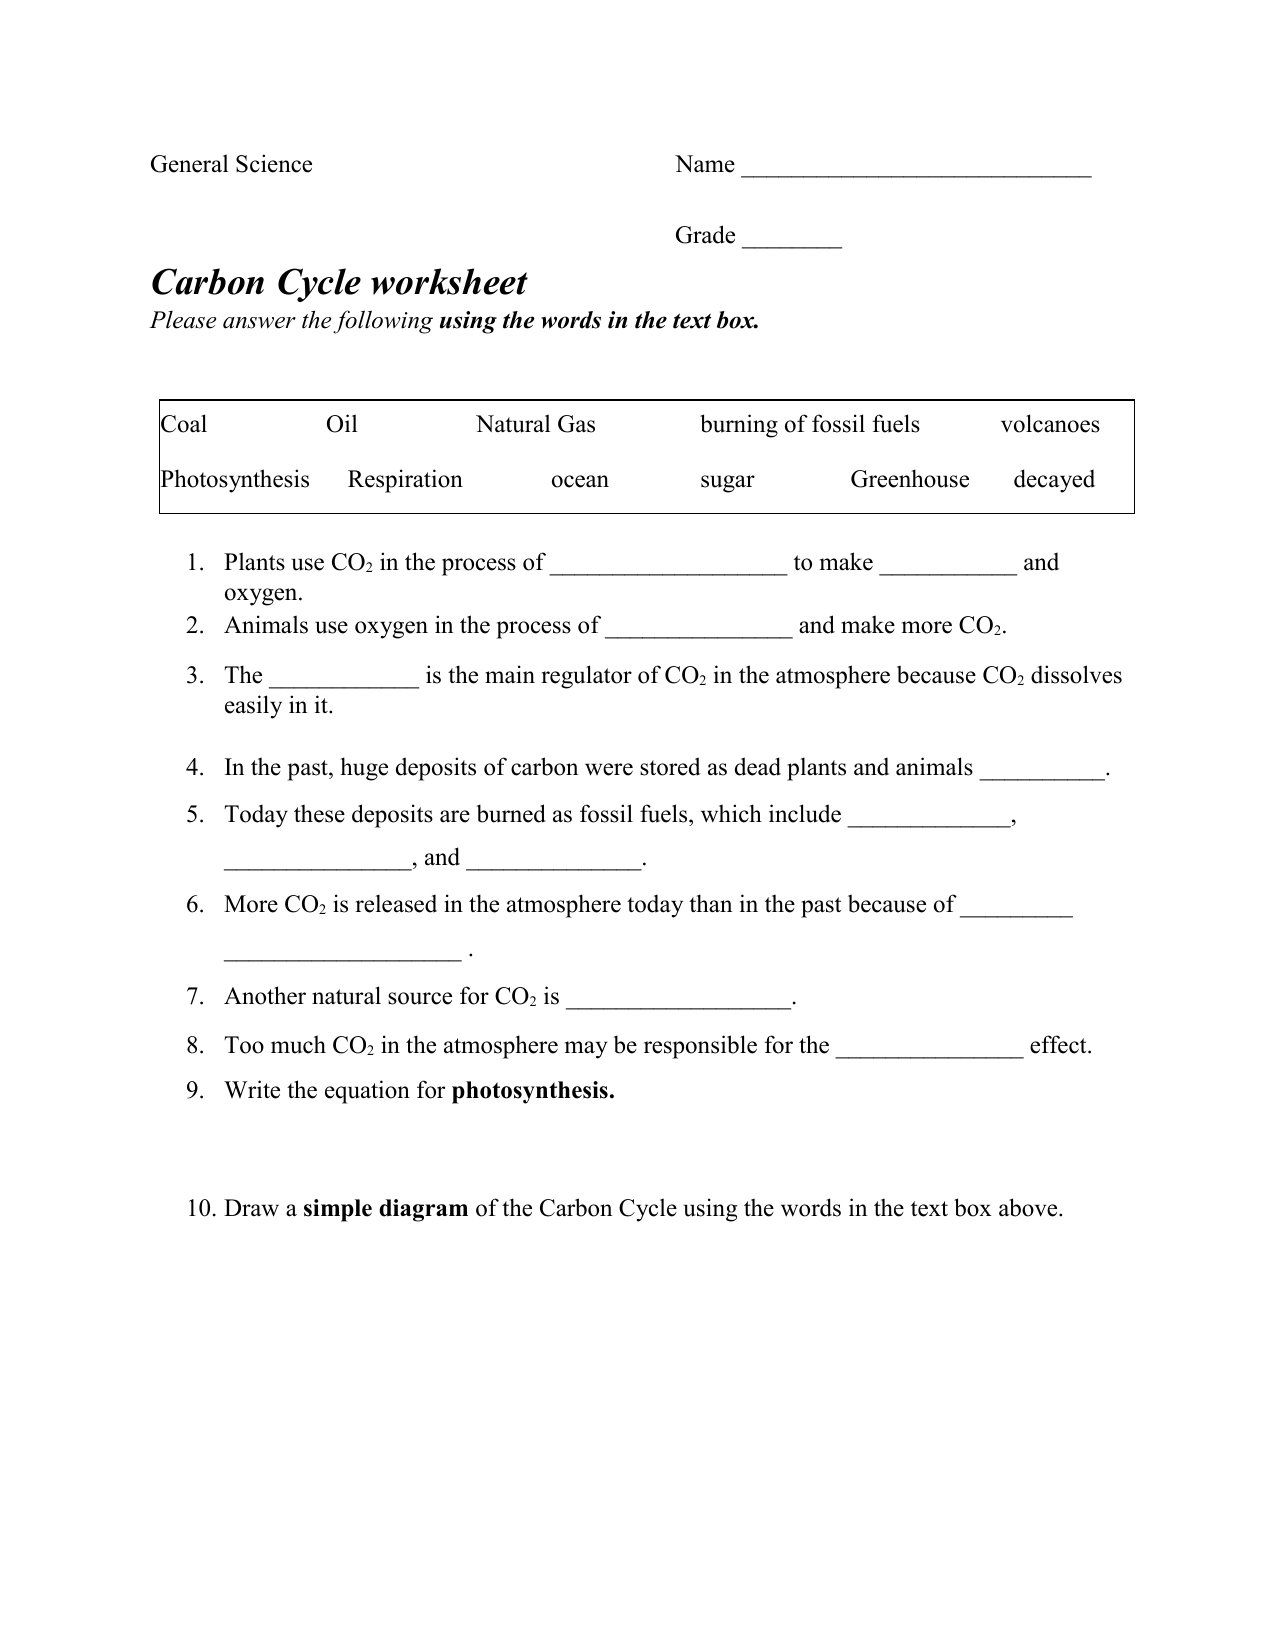 Carbon Cycle Worksheet For The Carbon Cycle Worksheet Answers